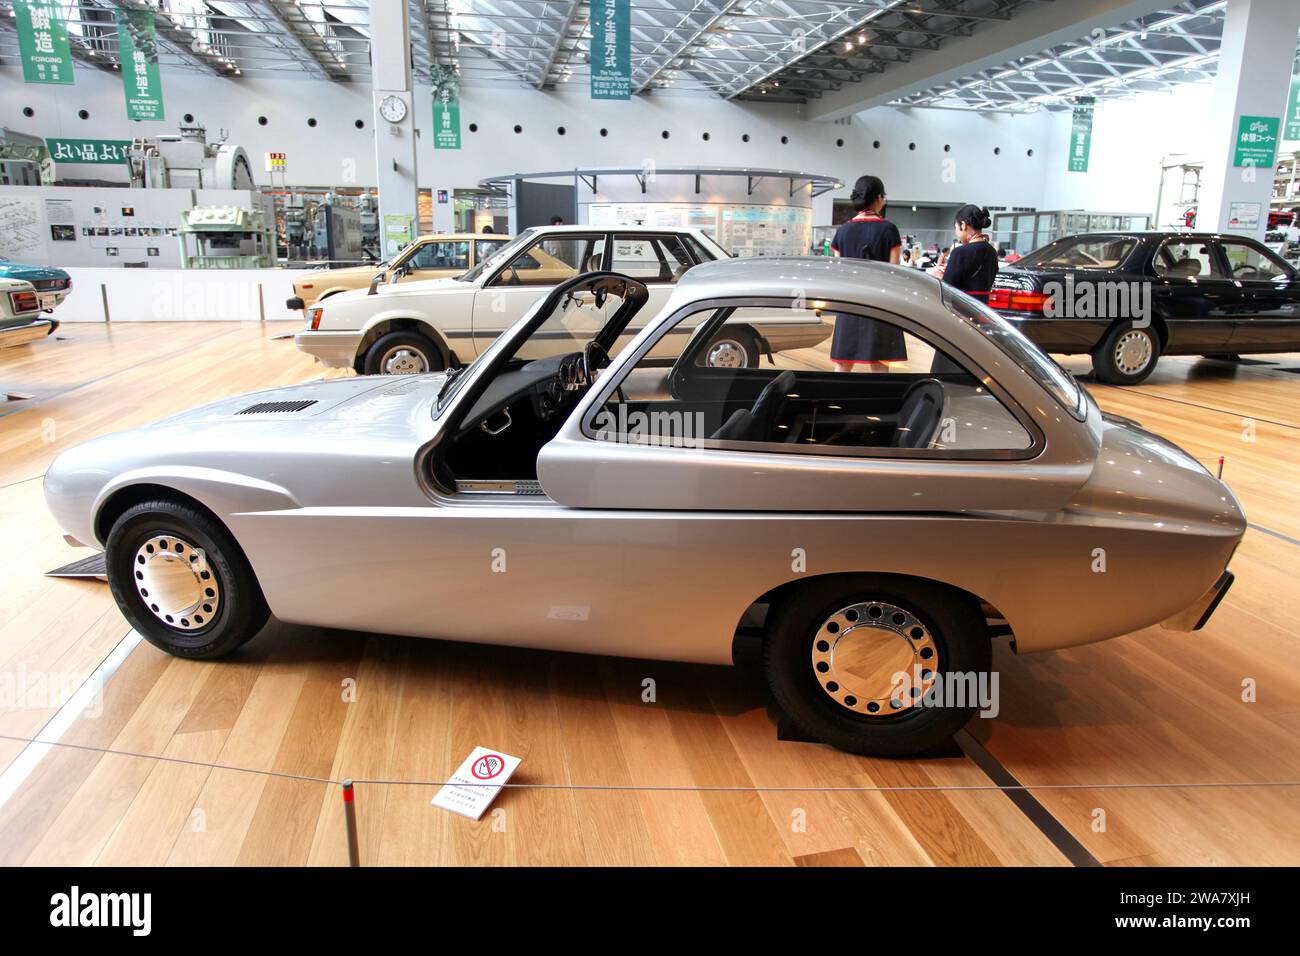 Interior of the Toyota Commemorative Museum of Industry and Technology in Nagoya, Japan. The 1962 Toyota Publica Sports is being displayed. Stock Photo